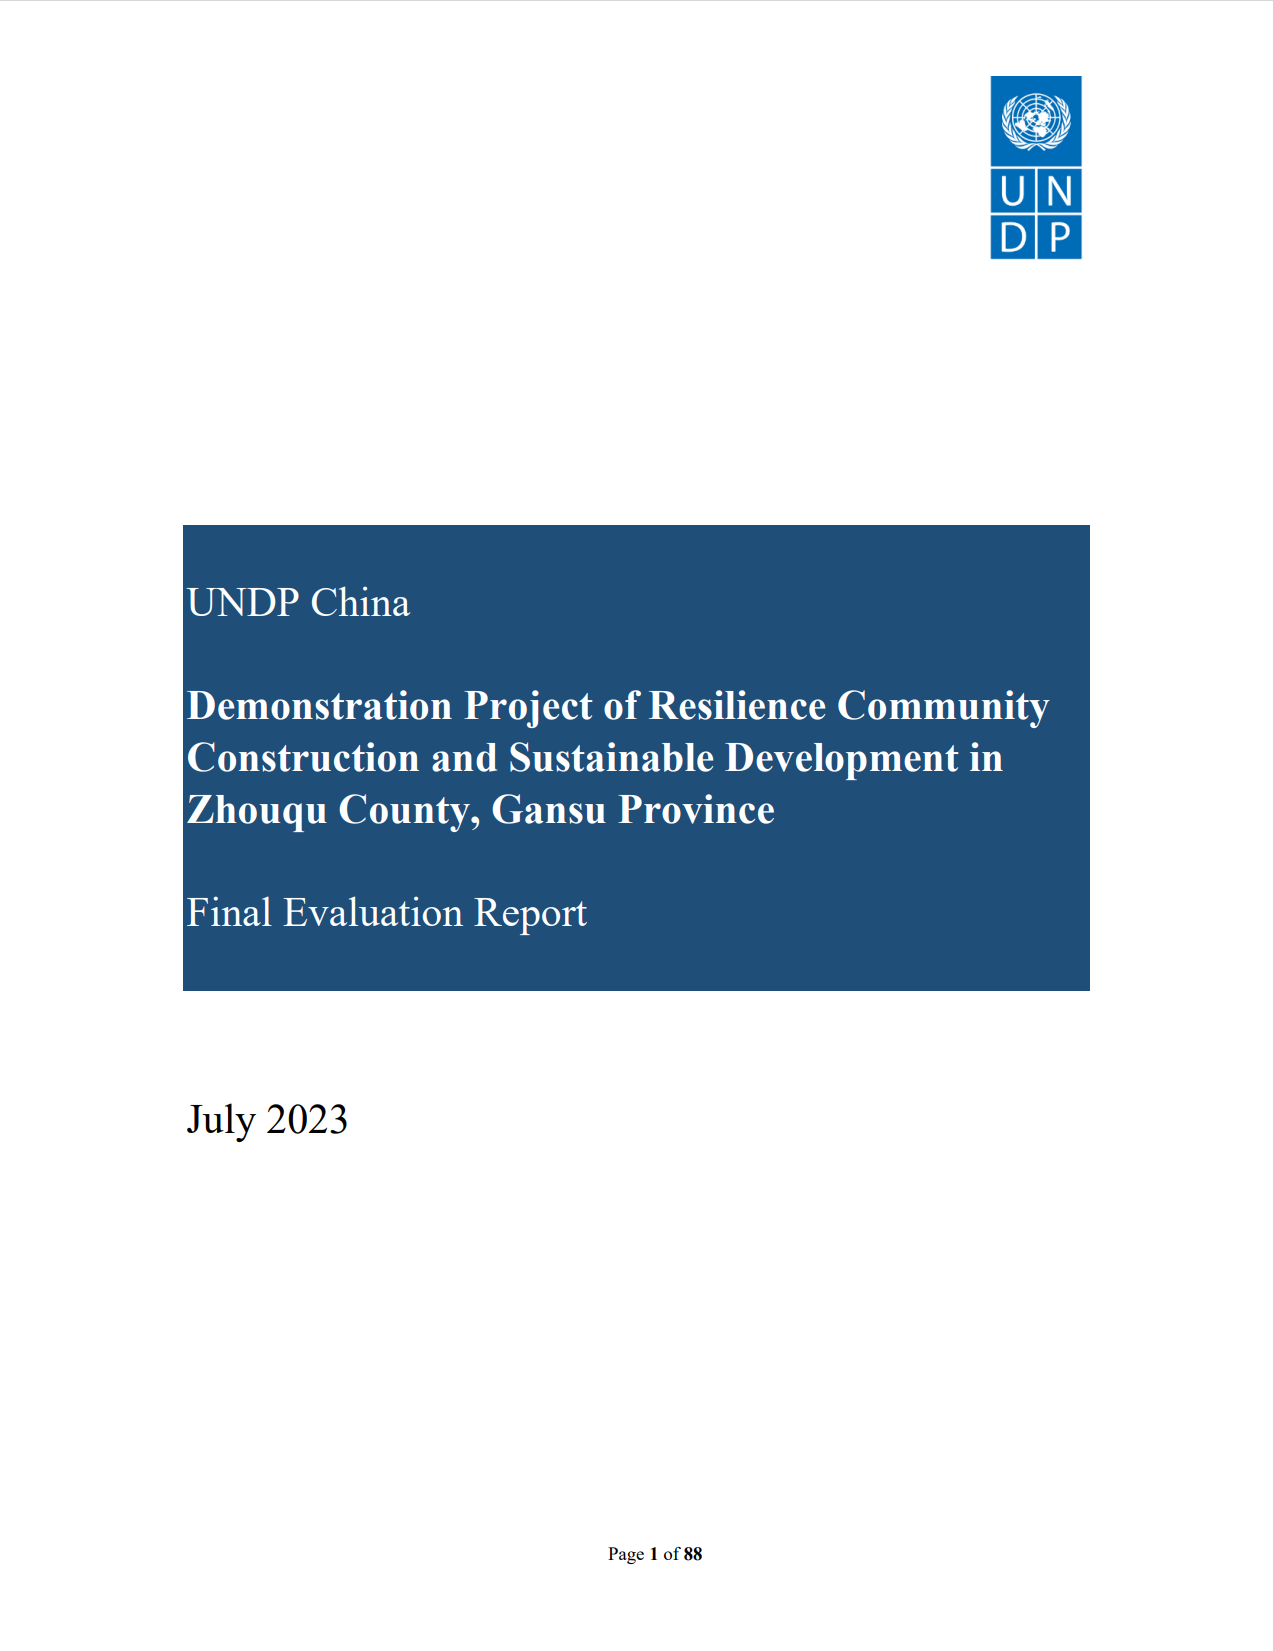 Final Evaluation of Resilient Community and Rural Sustainable Dev in Zhouqu Project